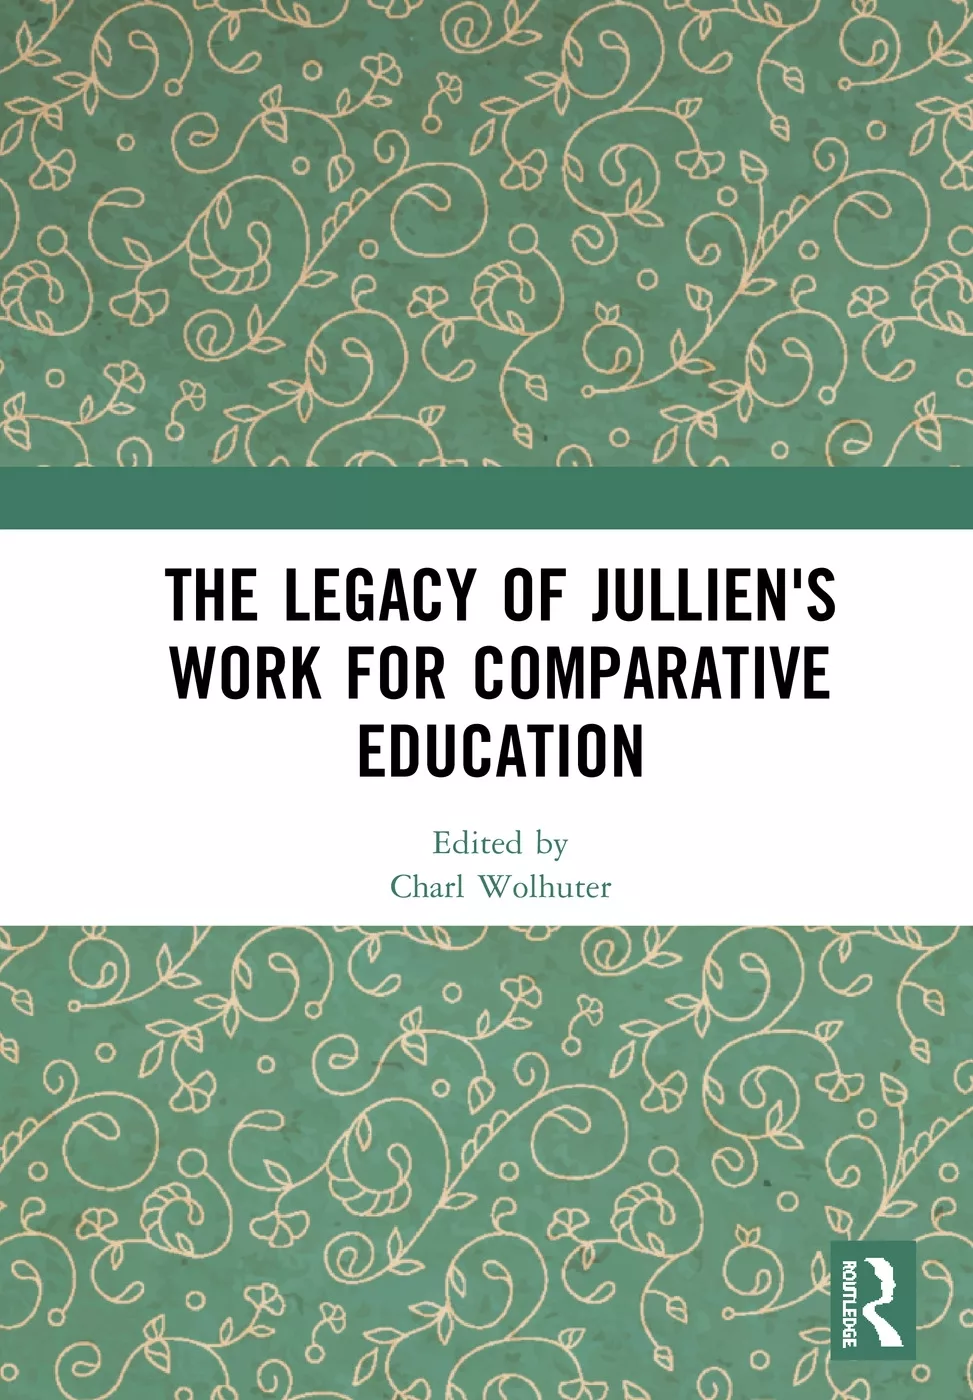 The Legacy of Julliens Work for Comparative Education